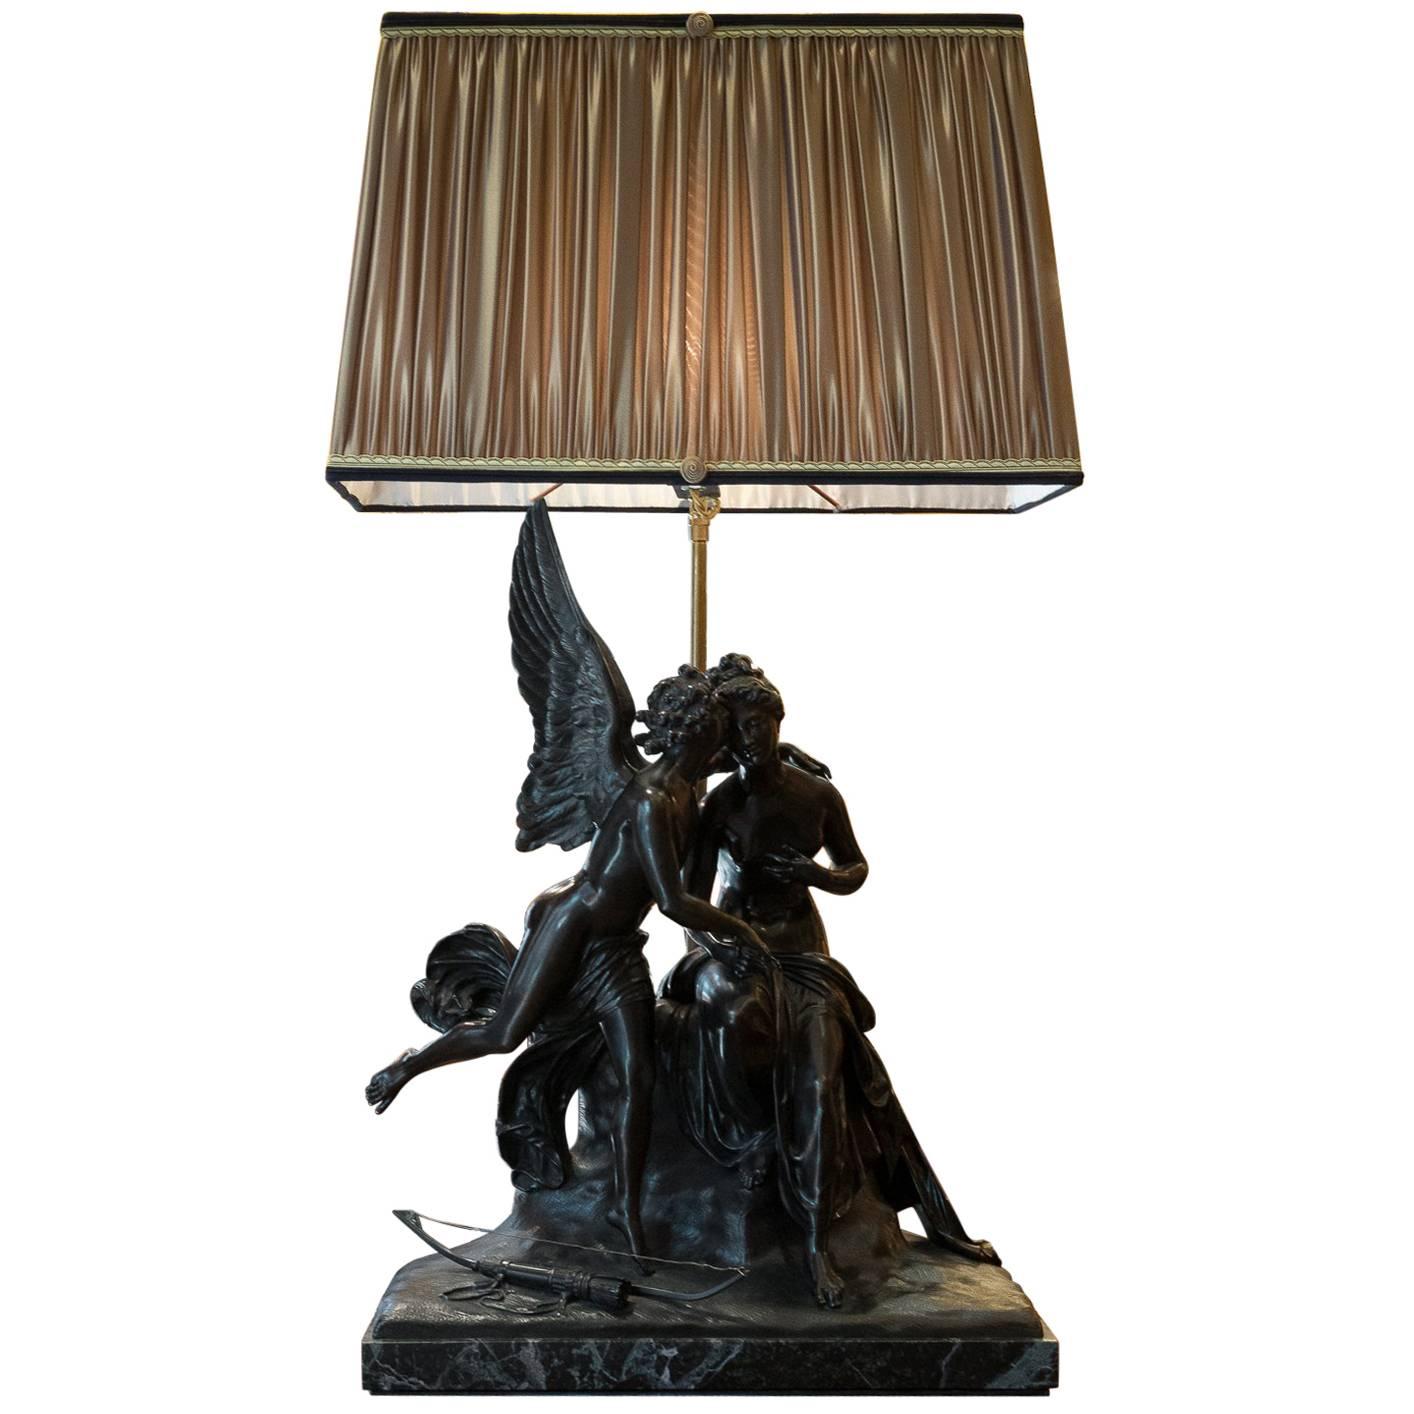 French Romantic Period, Patinated Bronze Sculpture Converted in Table Lamp For Sale